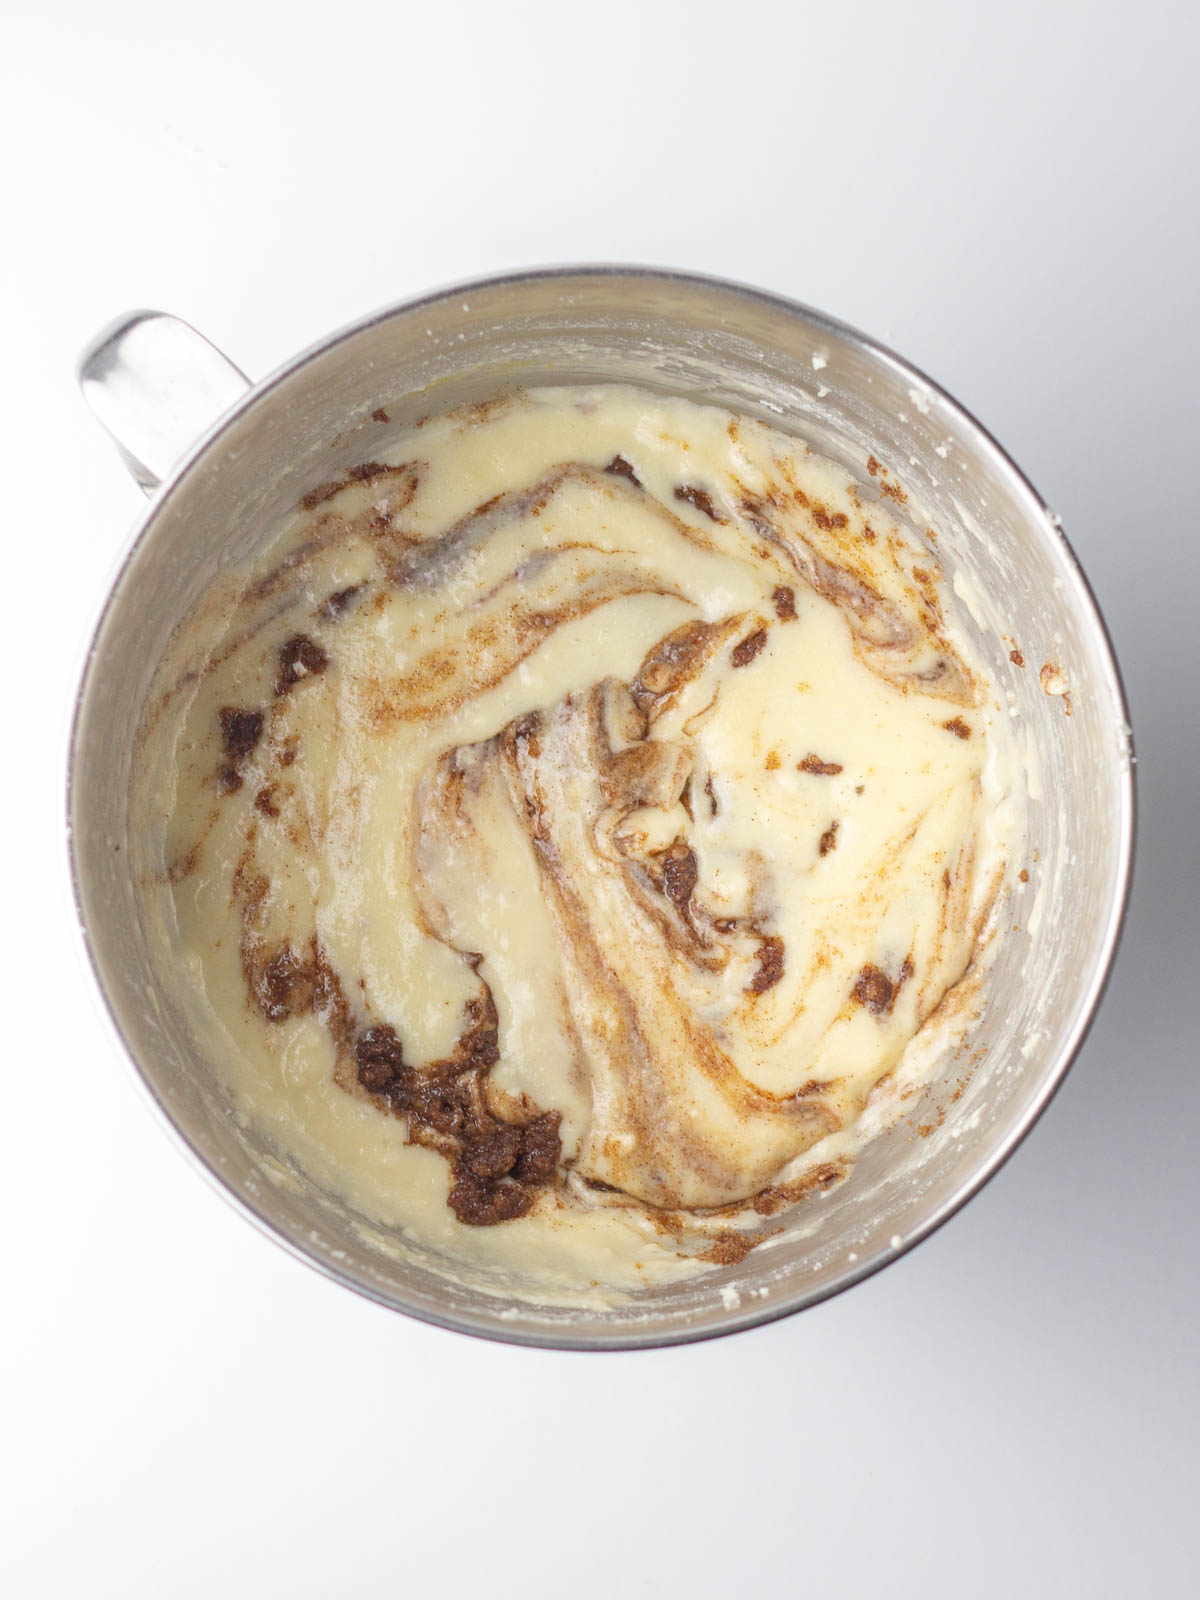 Cinnamon filling swirled into cupcake batter in a silver bowl.